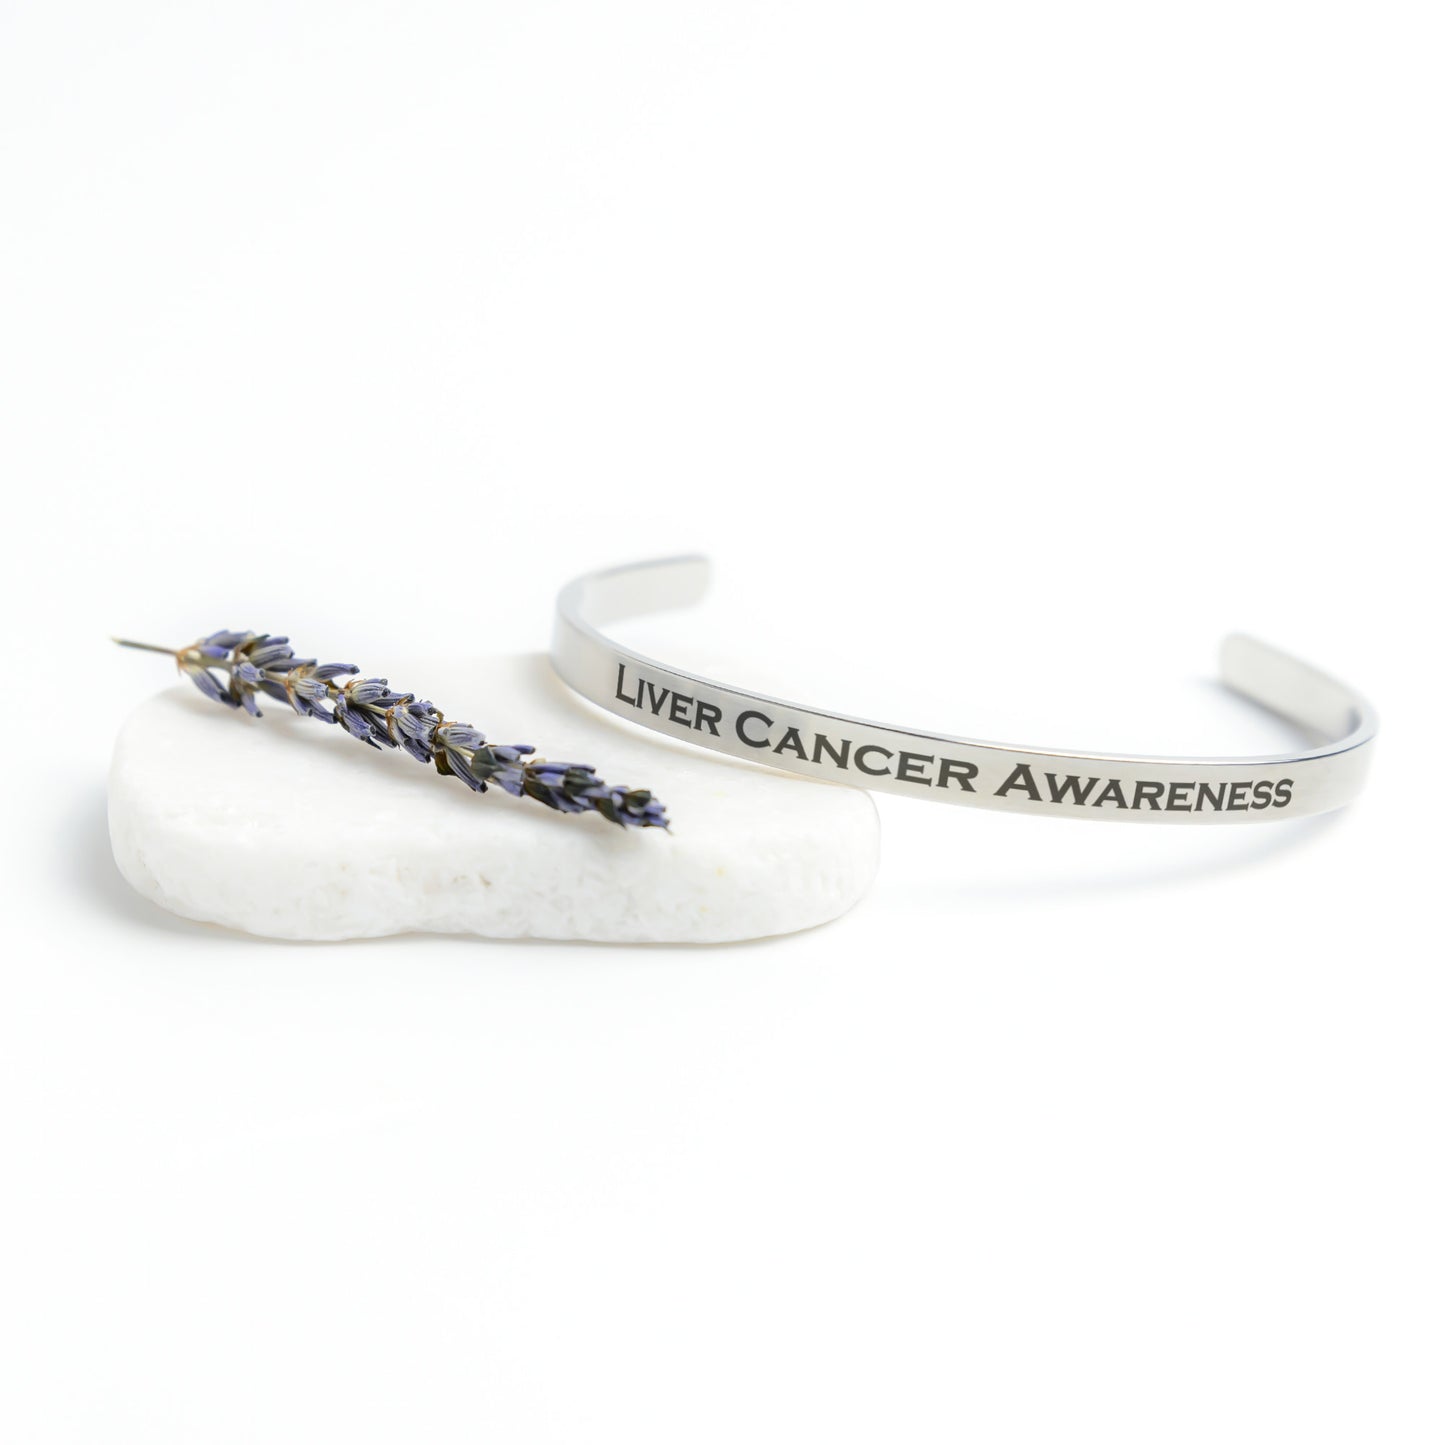 Personalized Liver Cancer Awareness Cuff Bracelet